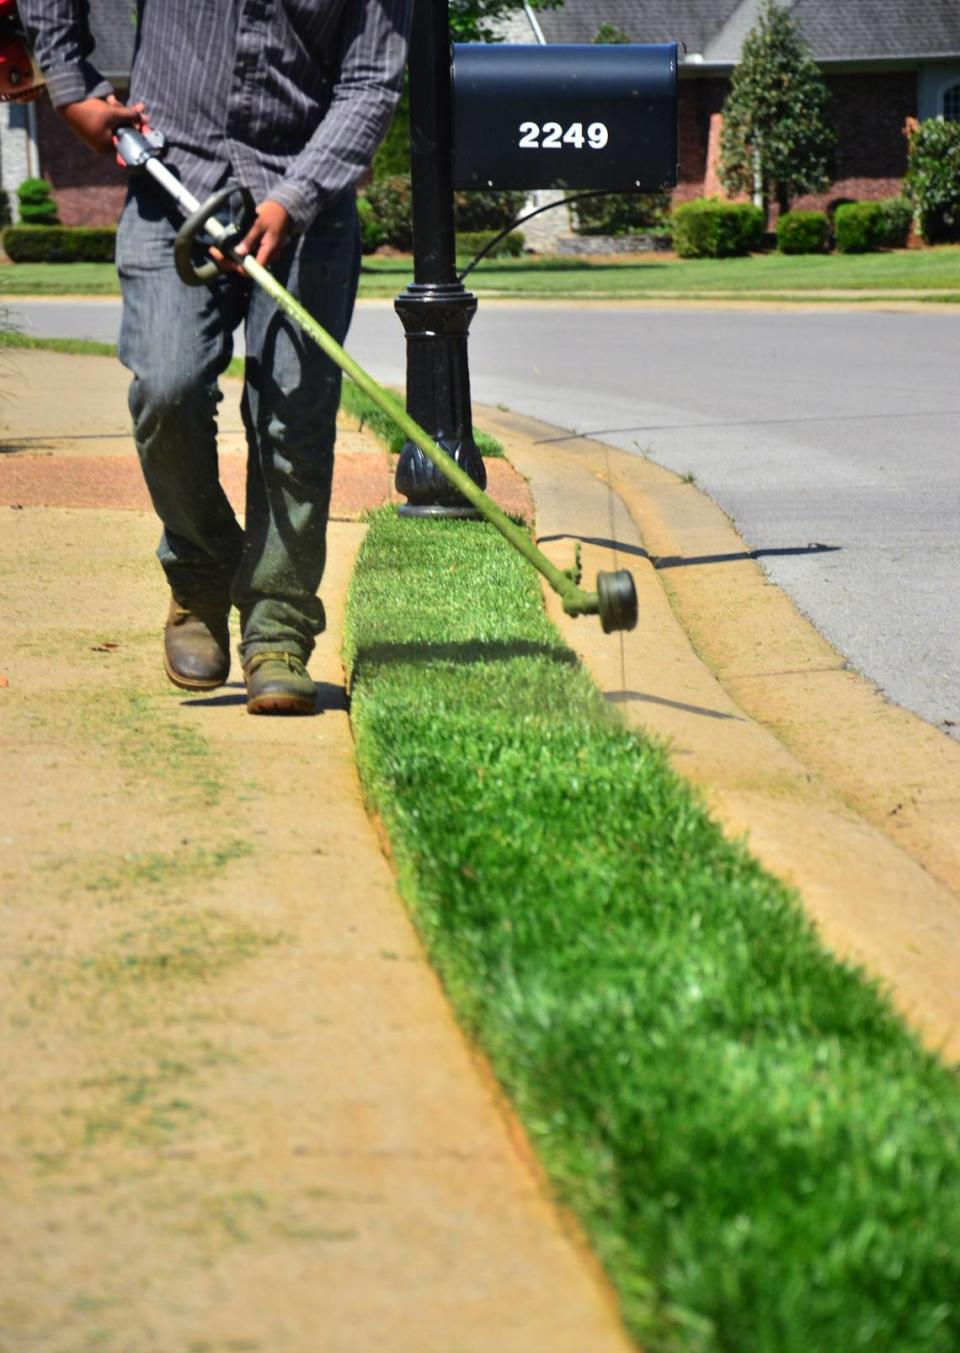 A Uber-like app for lawn mowing and landscaping launched this month in Columbus, Georgia. Co-founders say the service will make it easier for landscaping companies and their customers to connect.